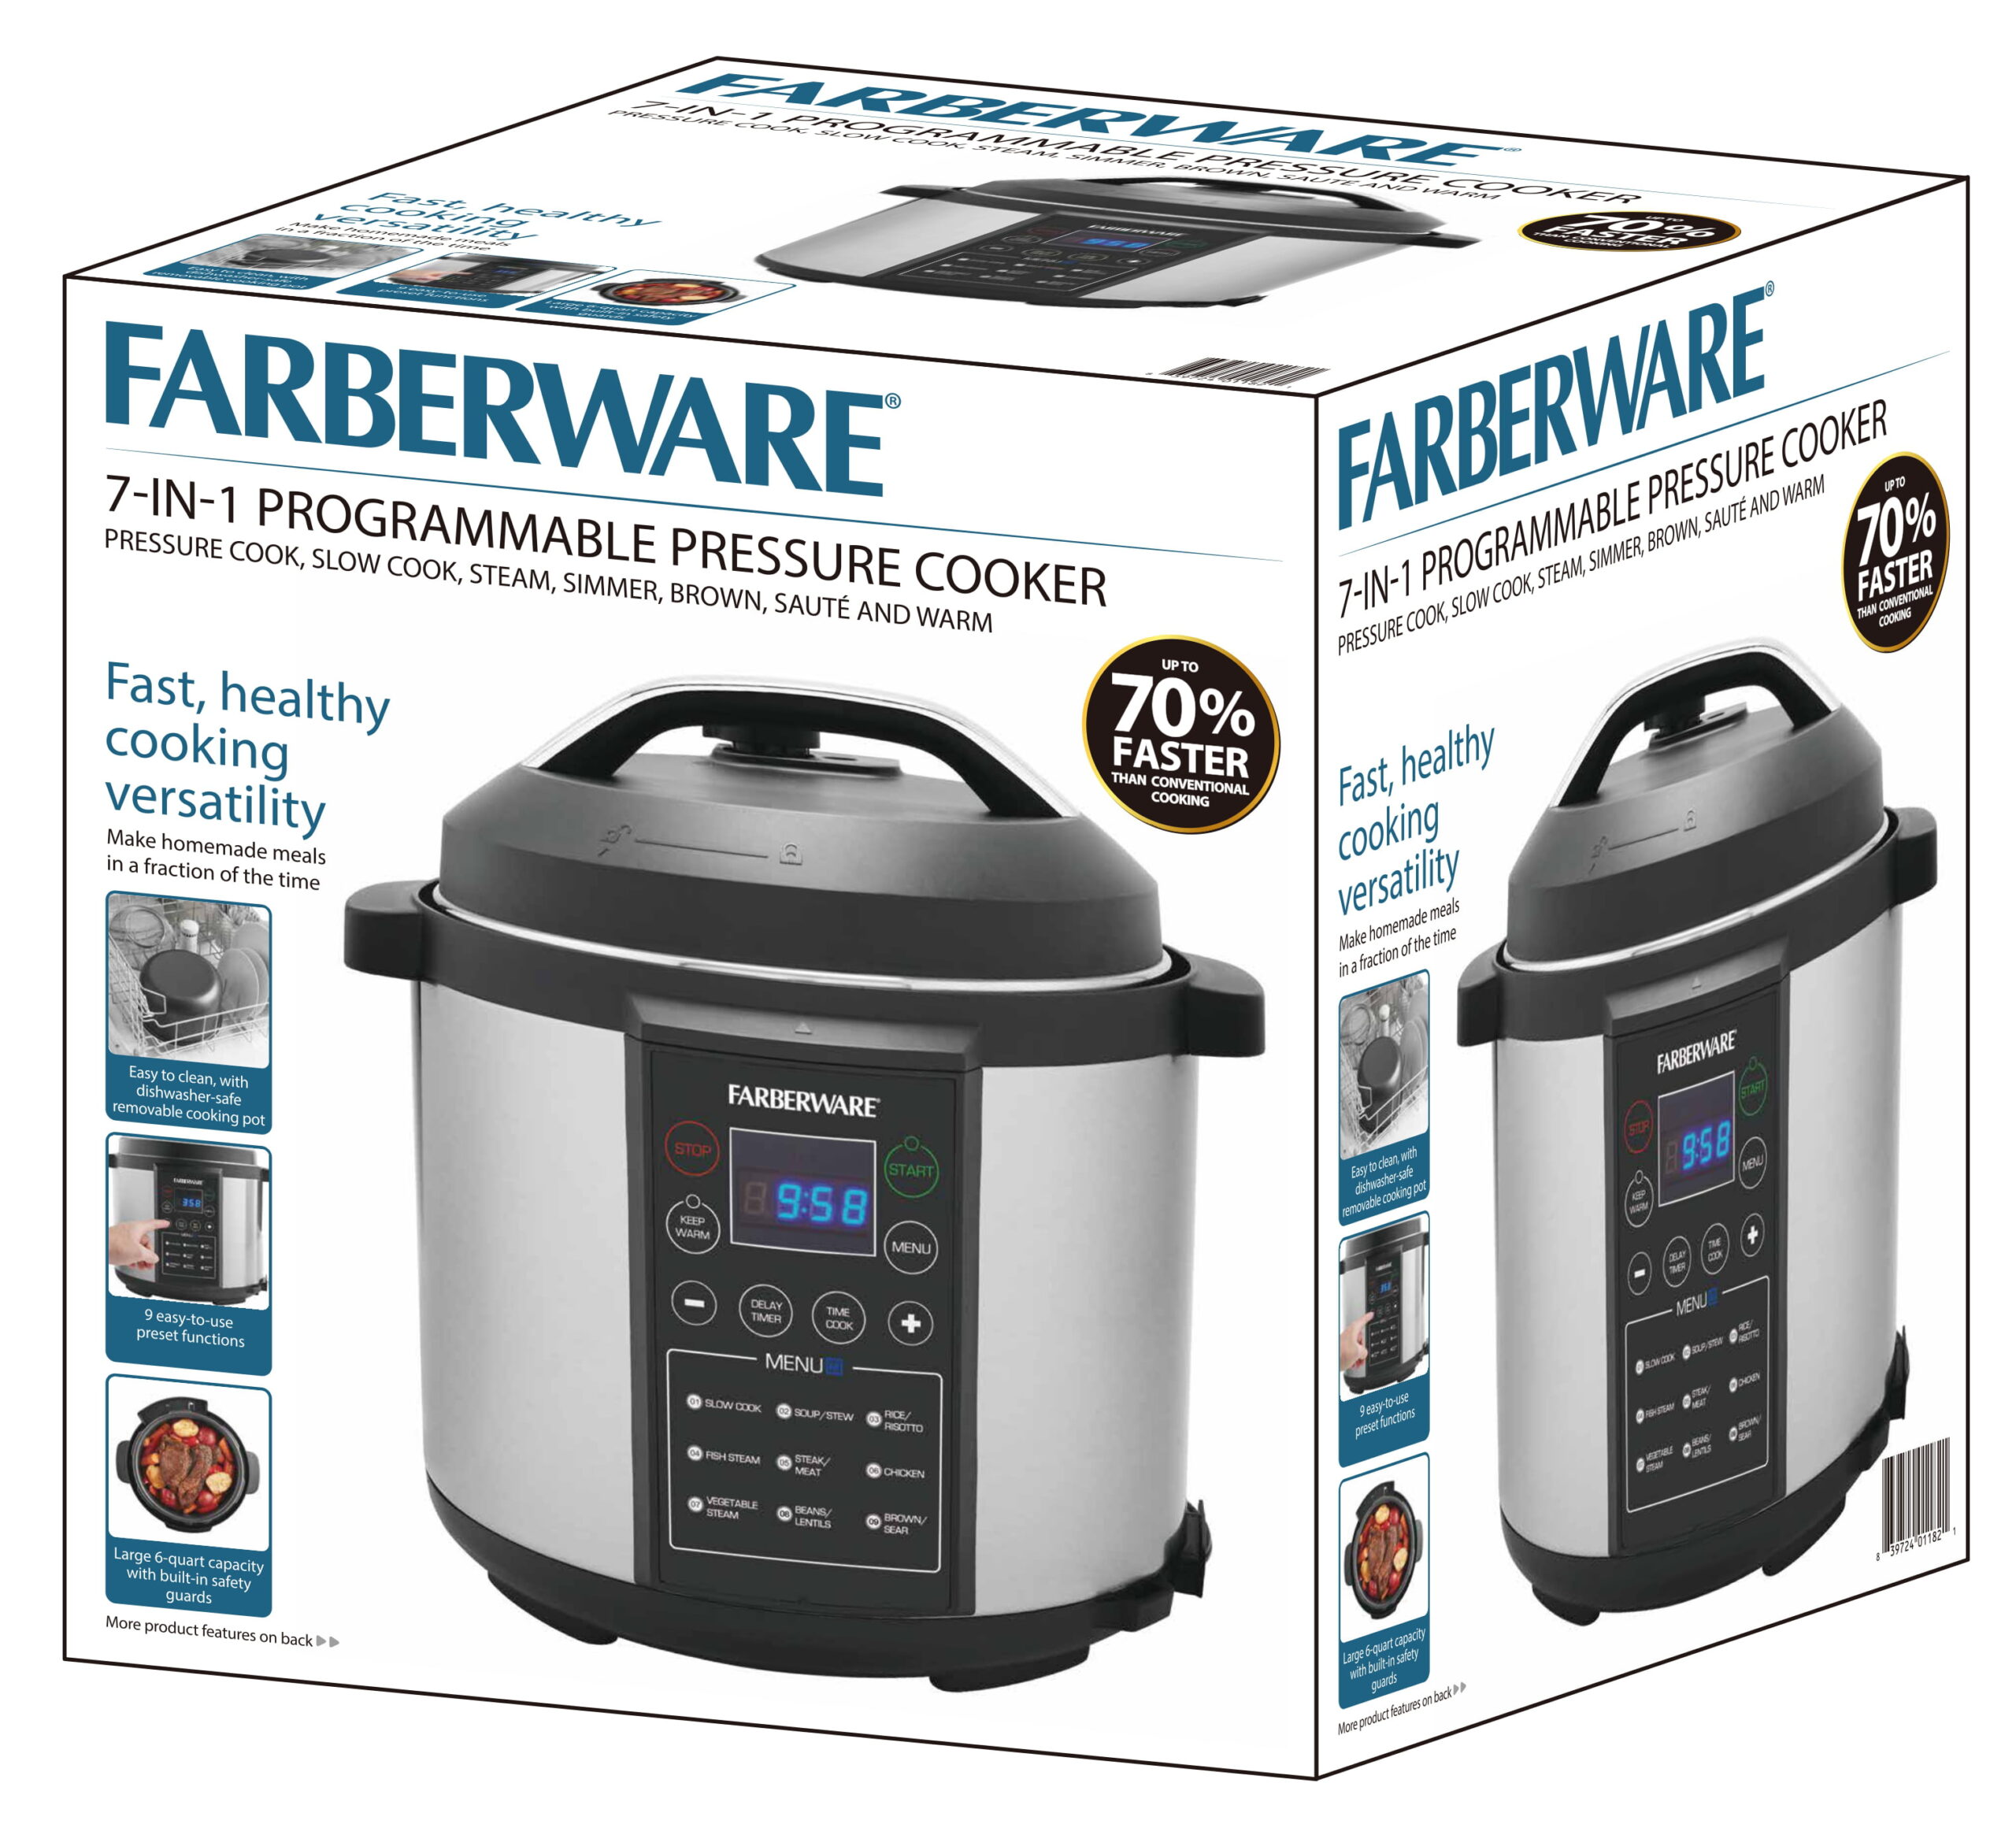 How To Cook Rice In Farberware 7 In 1 Pressure Cooker 